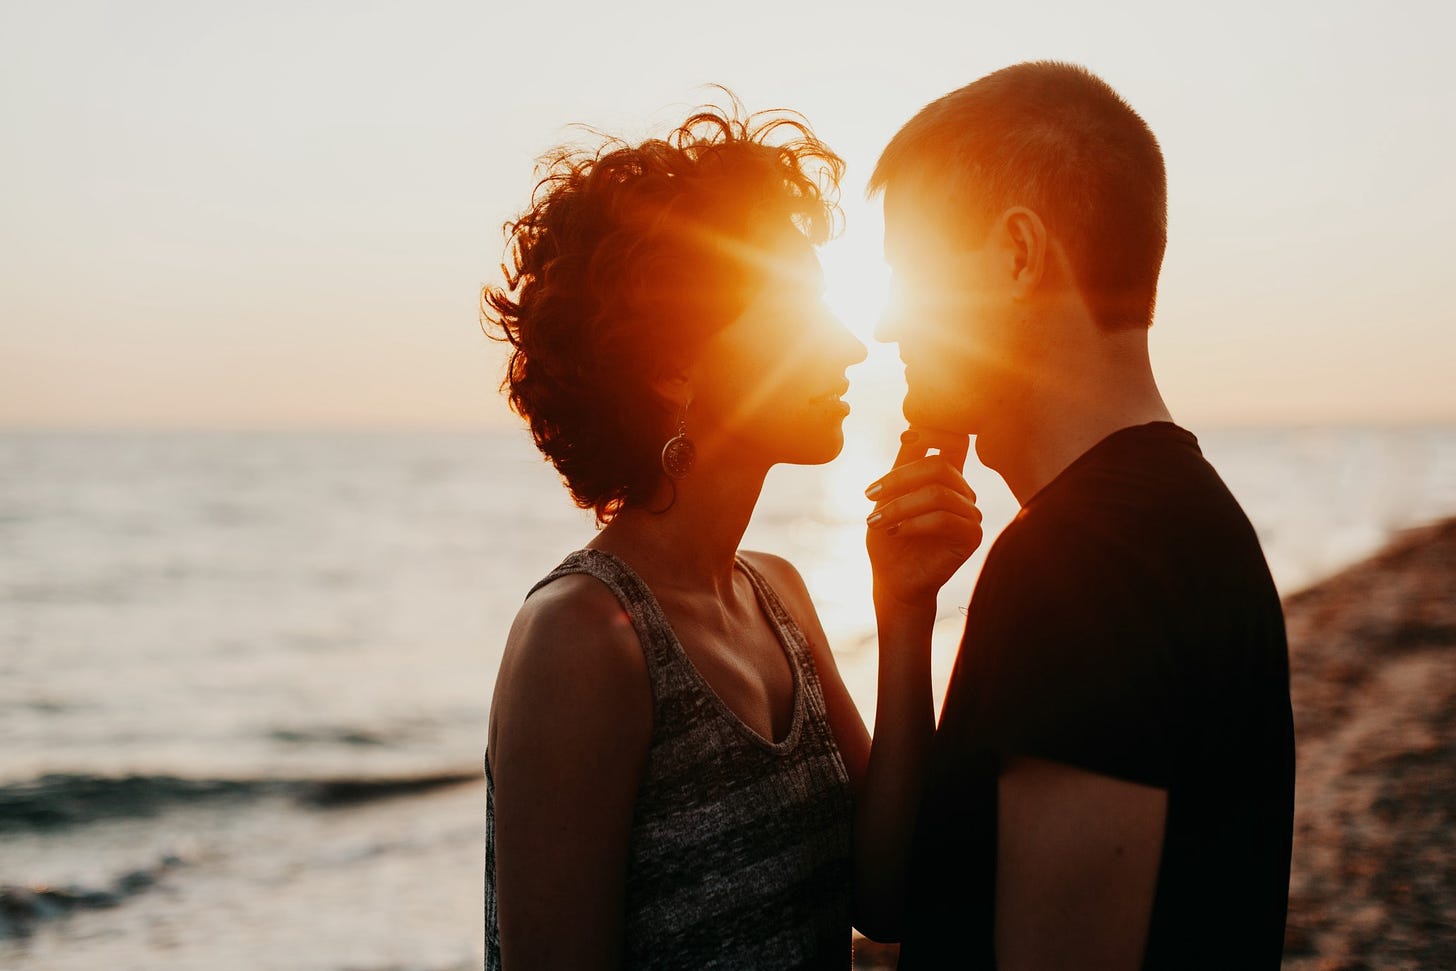 The silhoutte of a couple embraces on a beach as the sun sets in the background between them.